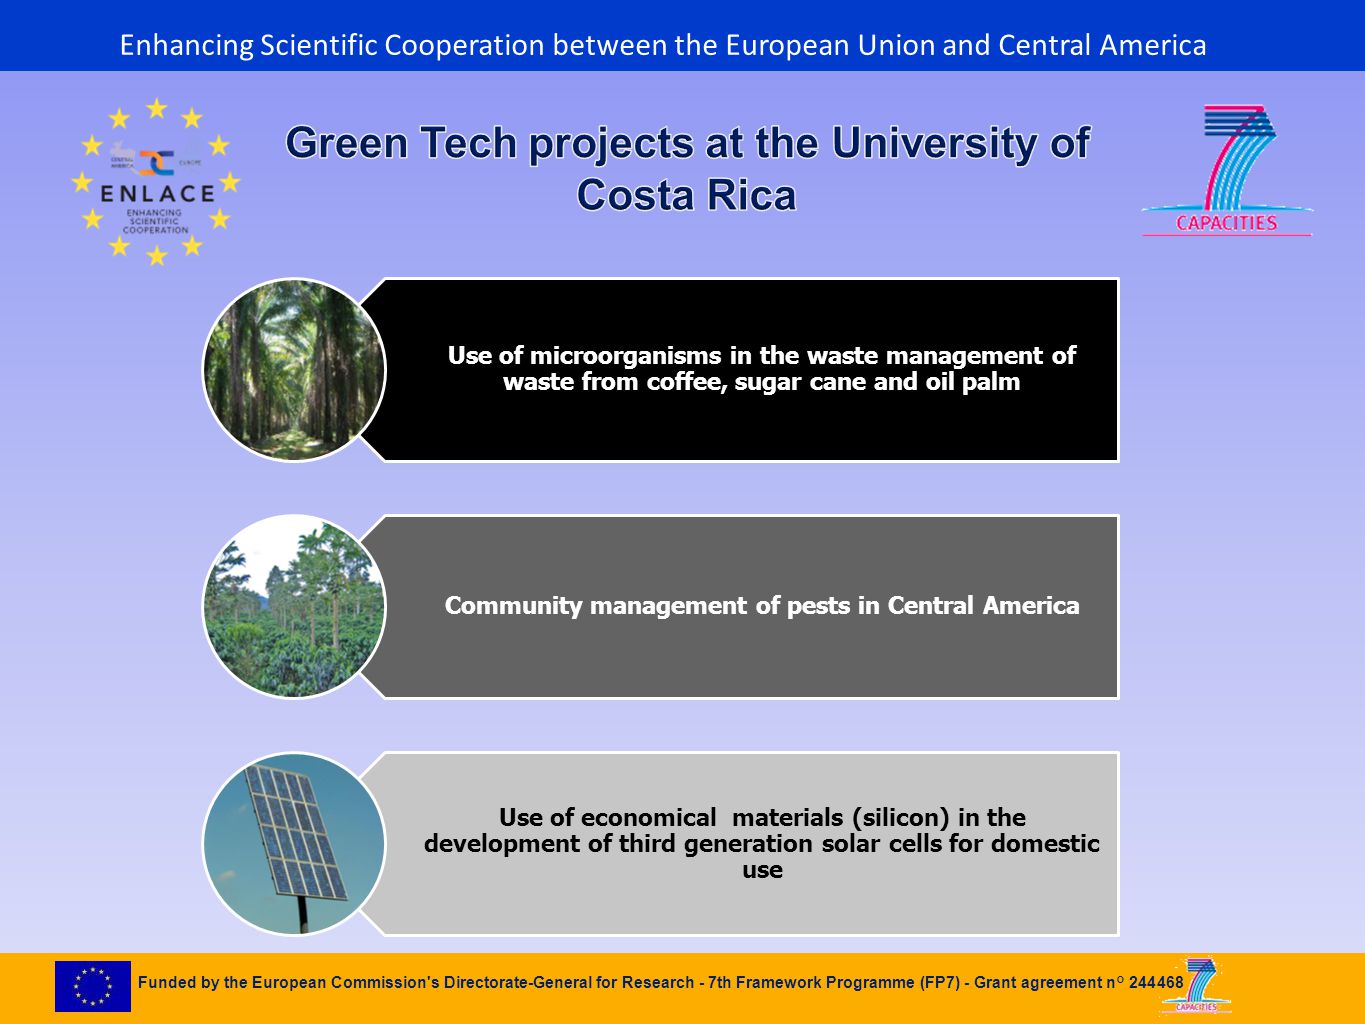 Use of microorganisms in the waste management of waste from coffee, sugar cane and oil palm Community management of pests in Central America Use of economical materials (silicon) in the development of third generation solar cells for domestic use Enhancing Scientific Cooperation between the European Union and Central America Funded by the European Commission s Directorate-General for Research - 7th Framework Programme (FP7) - Grant agreement n°